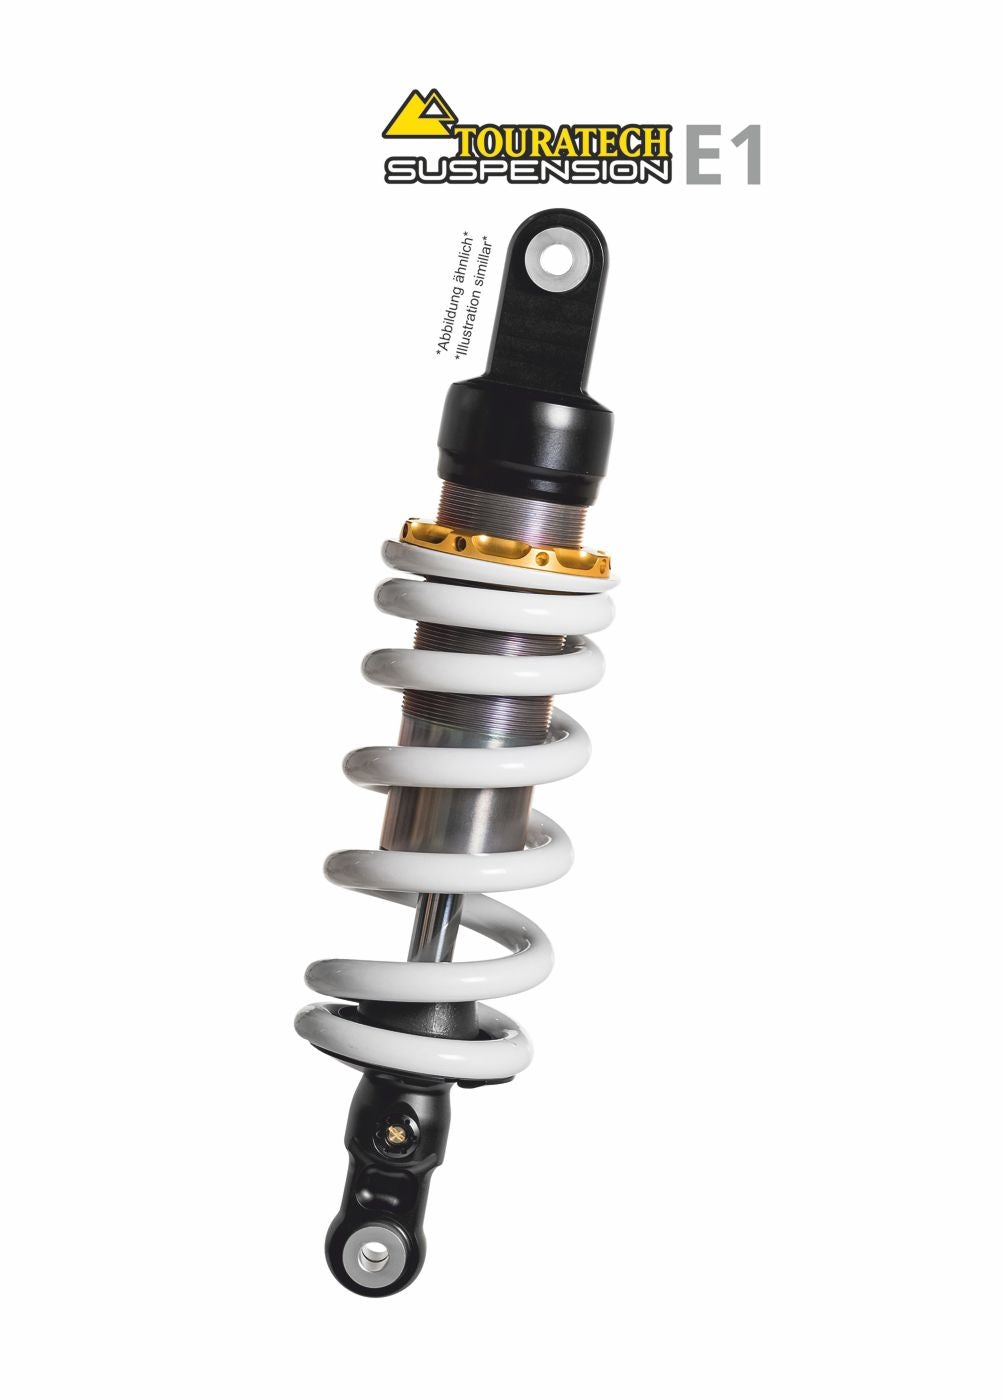 Touratech Suspension E1 shock absorber for Yamaha YZF 600 R6 1998 - 2002